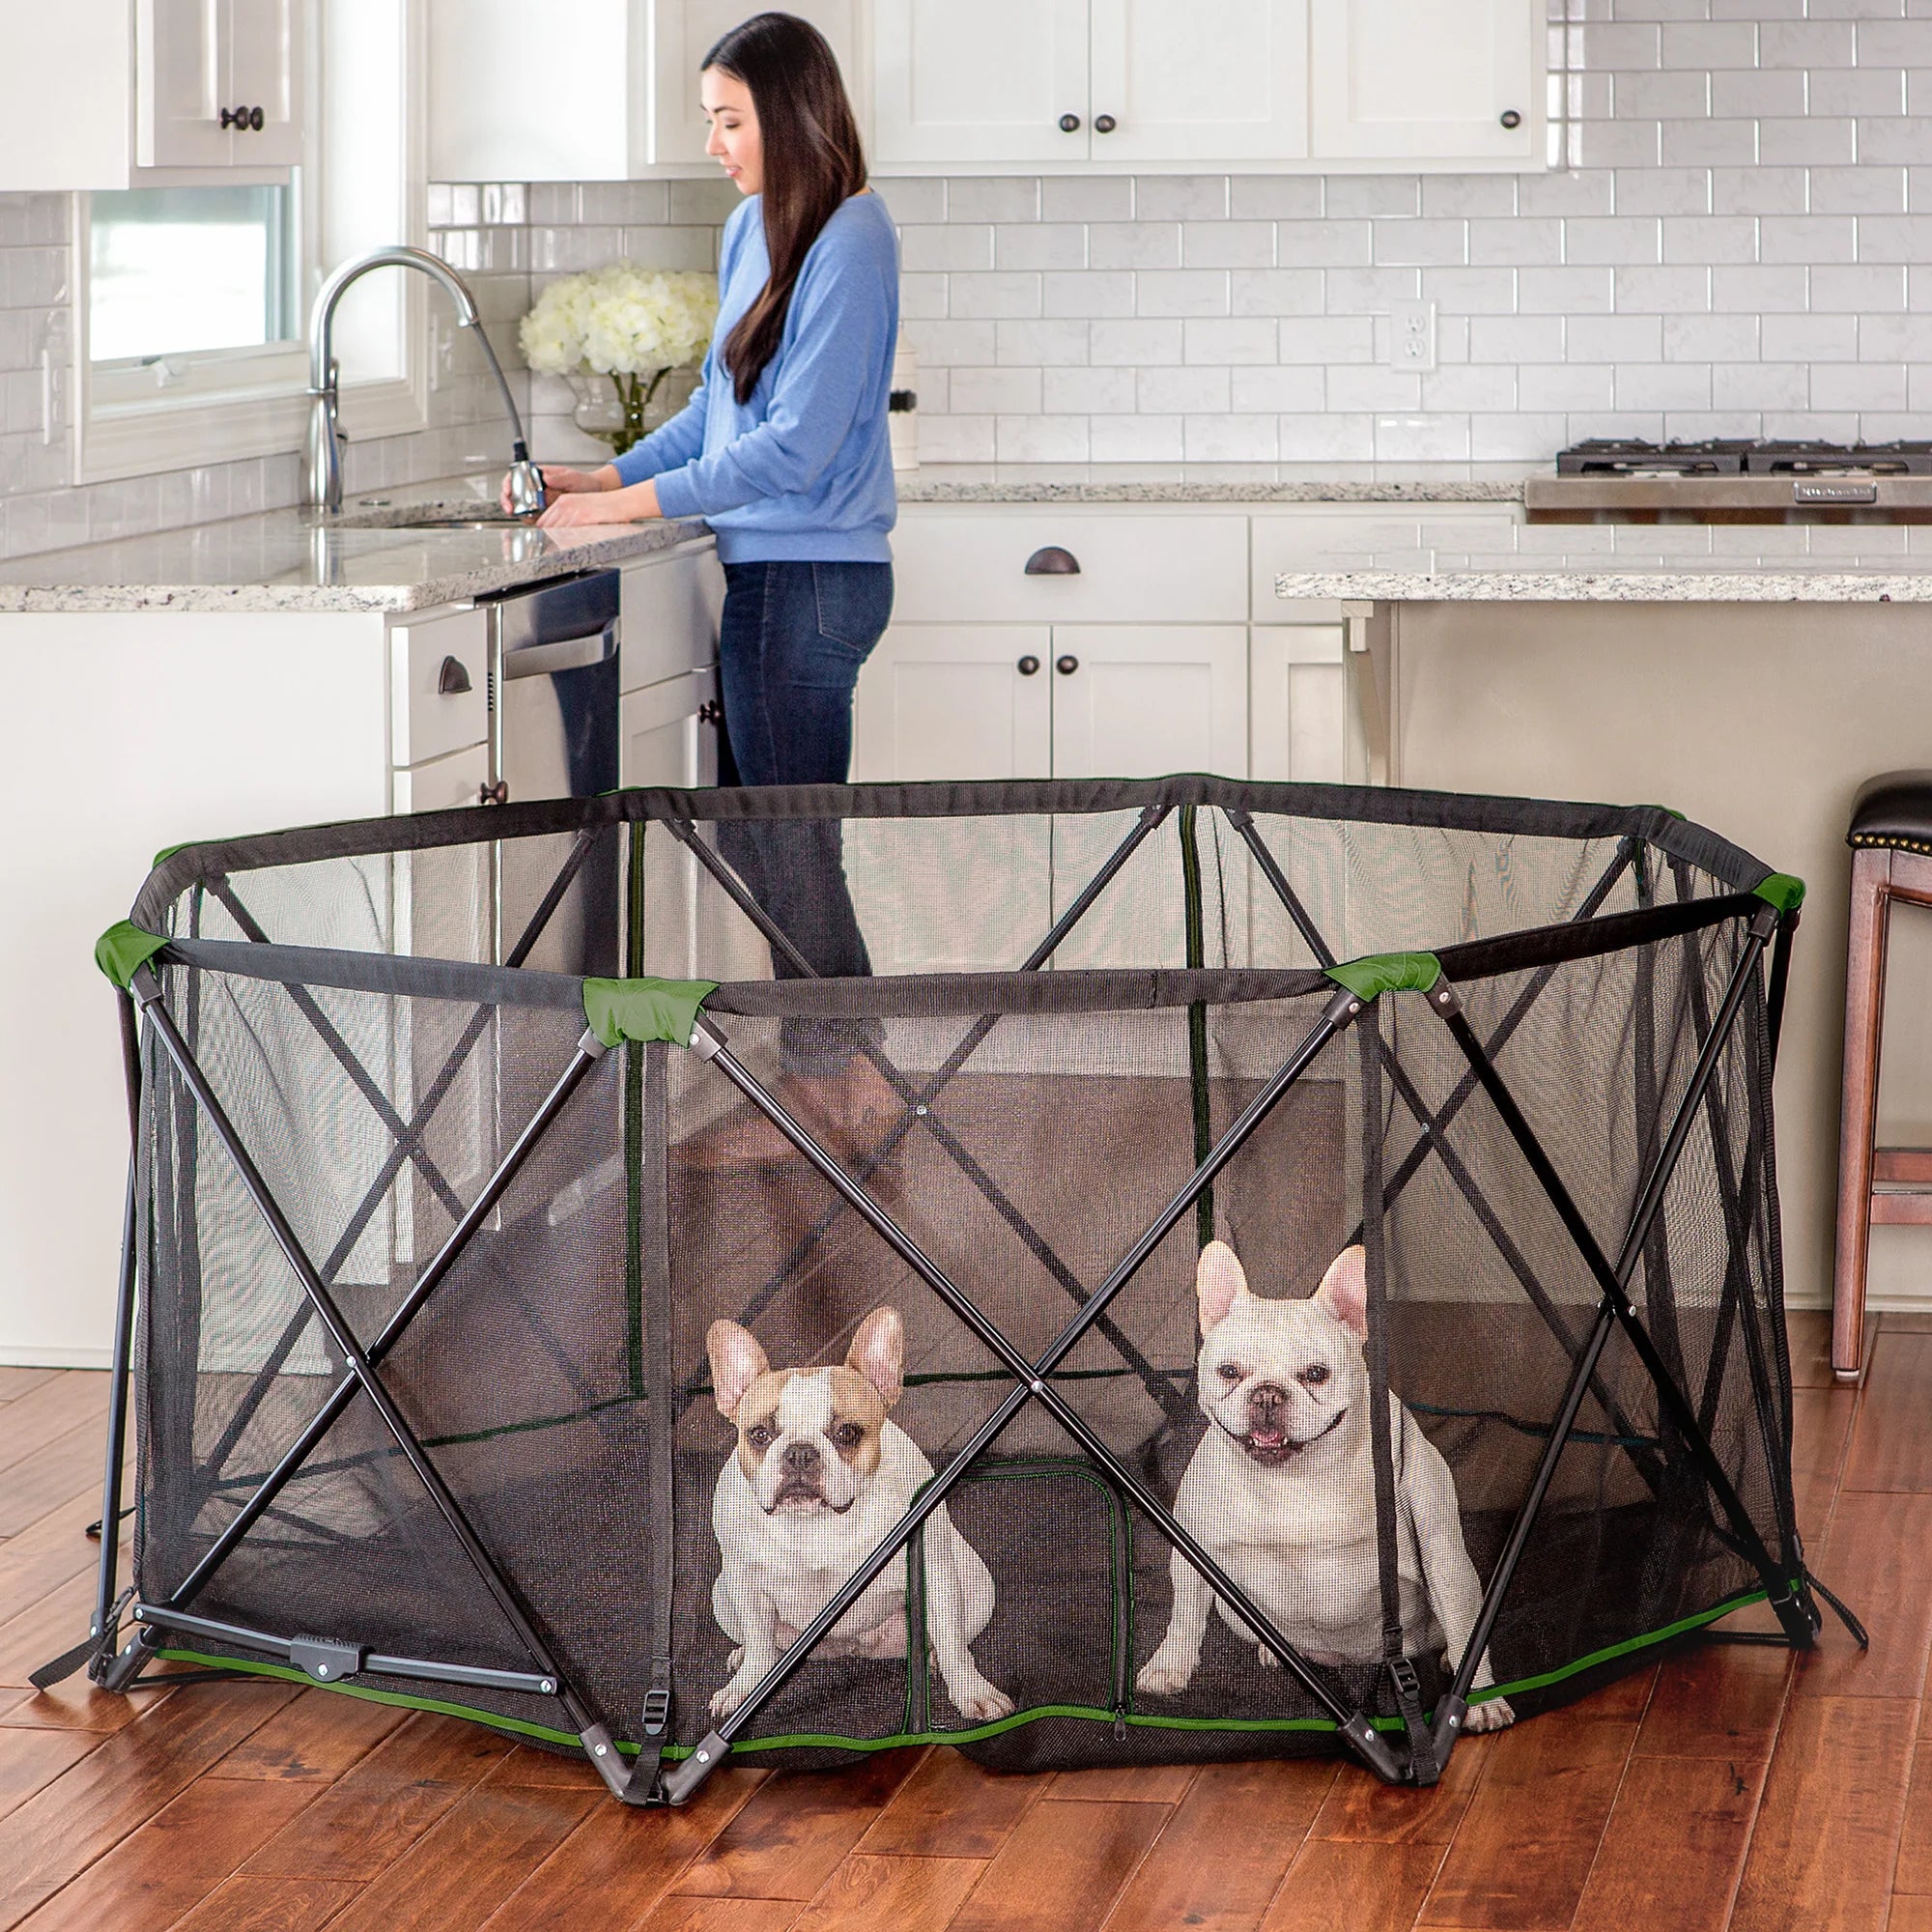 Two dogs in Portable Pet Pen while in the kitchen with a woman behind them doing dishes.